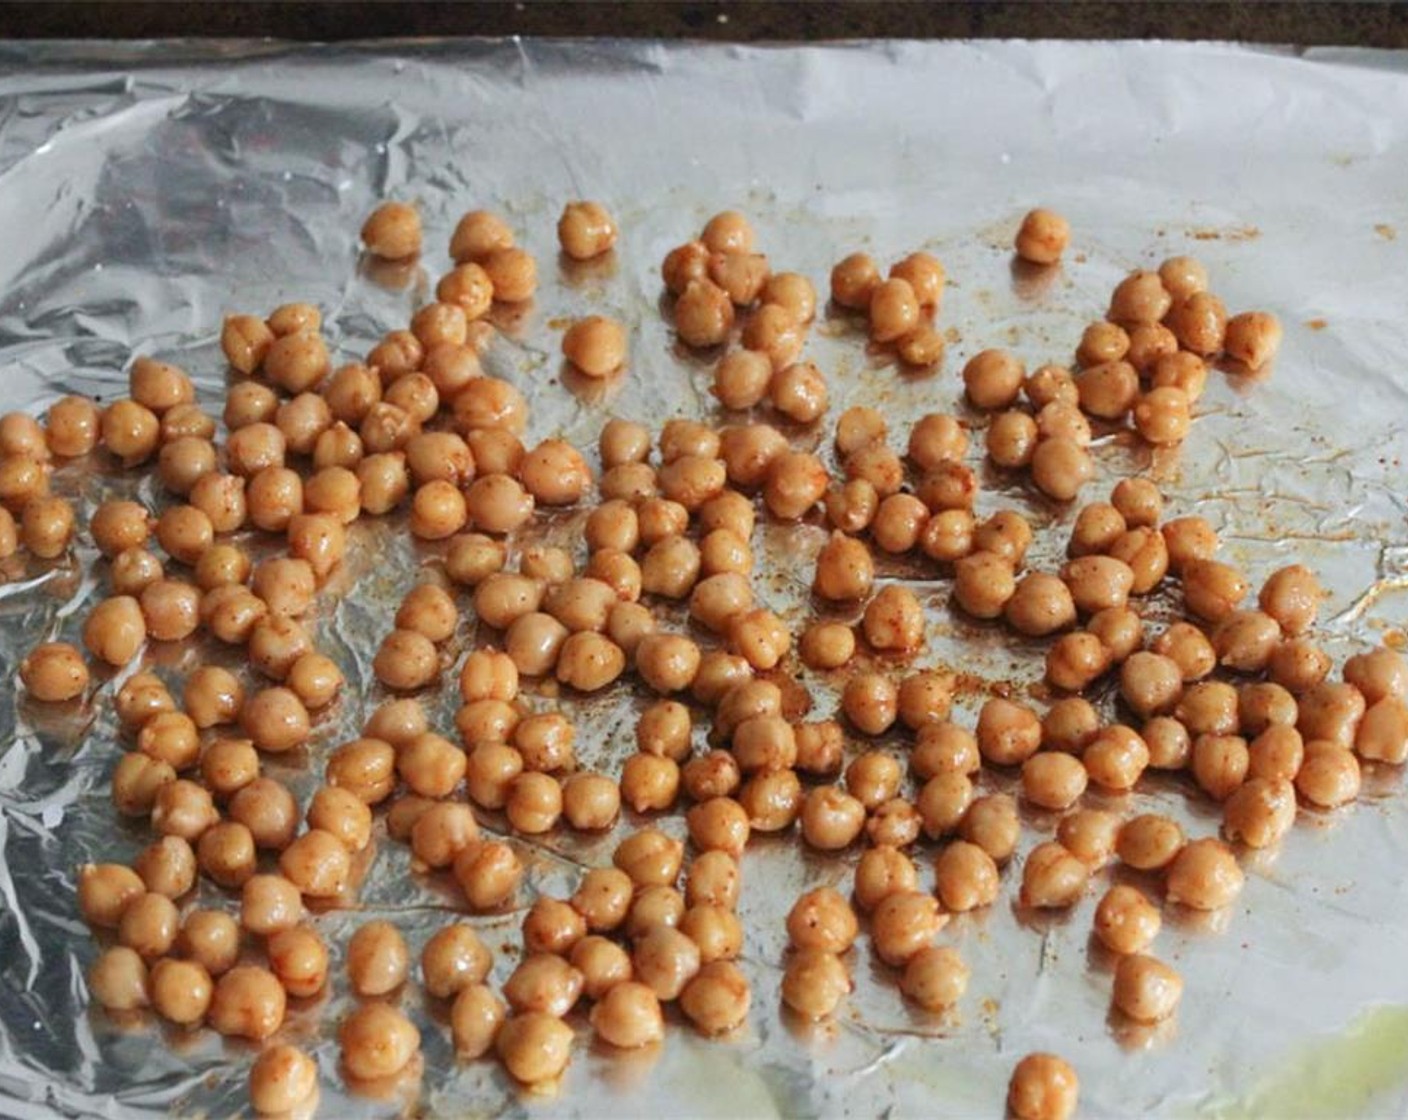 step 3 Place the chickpeas on the prepared baking sheet. Drizzle with Extra-Virgin Olive Oil (1 Tbsp) and sprinkle with the Smoked Paprika (1/2 tsp), Kosher Salt (1/2 tsp), and Cayenne Pepper (1 pinch). Toss to coat.